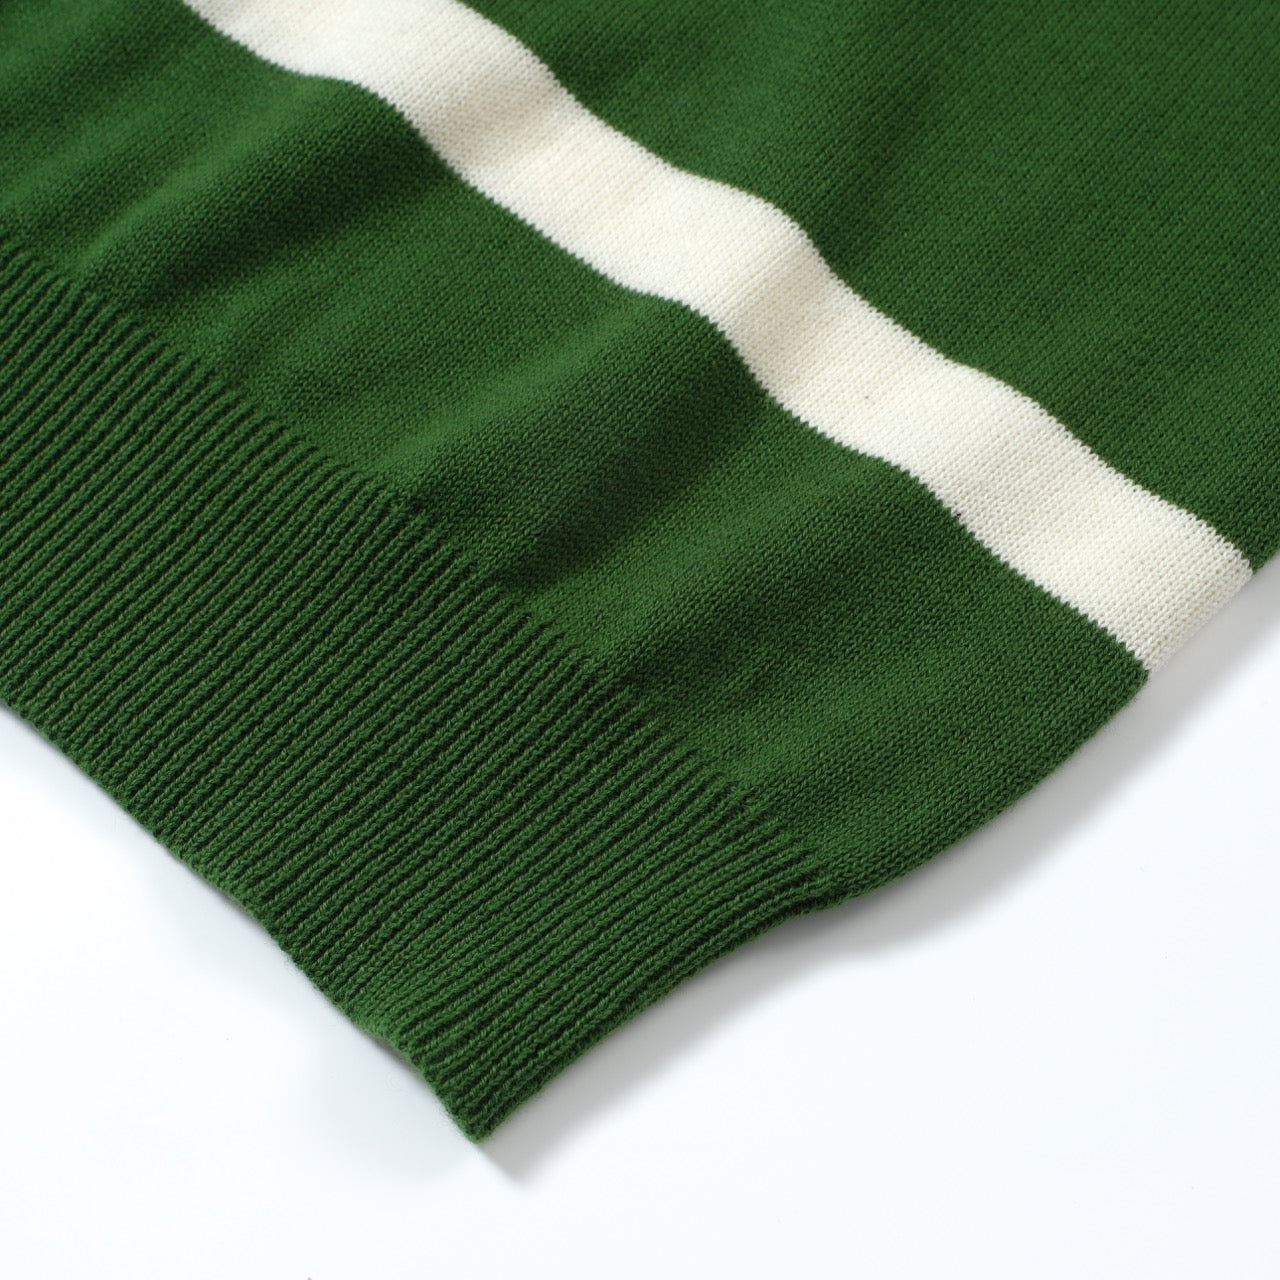 OXKNIT Men Vintage Clothing 1960s Mod Style Casual Dark Green Line Knitted Retro Wear